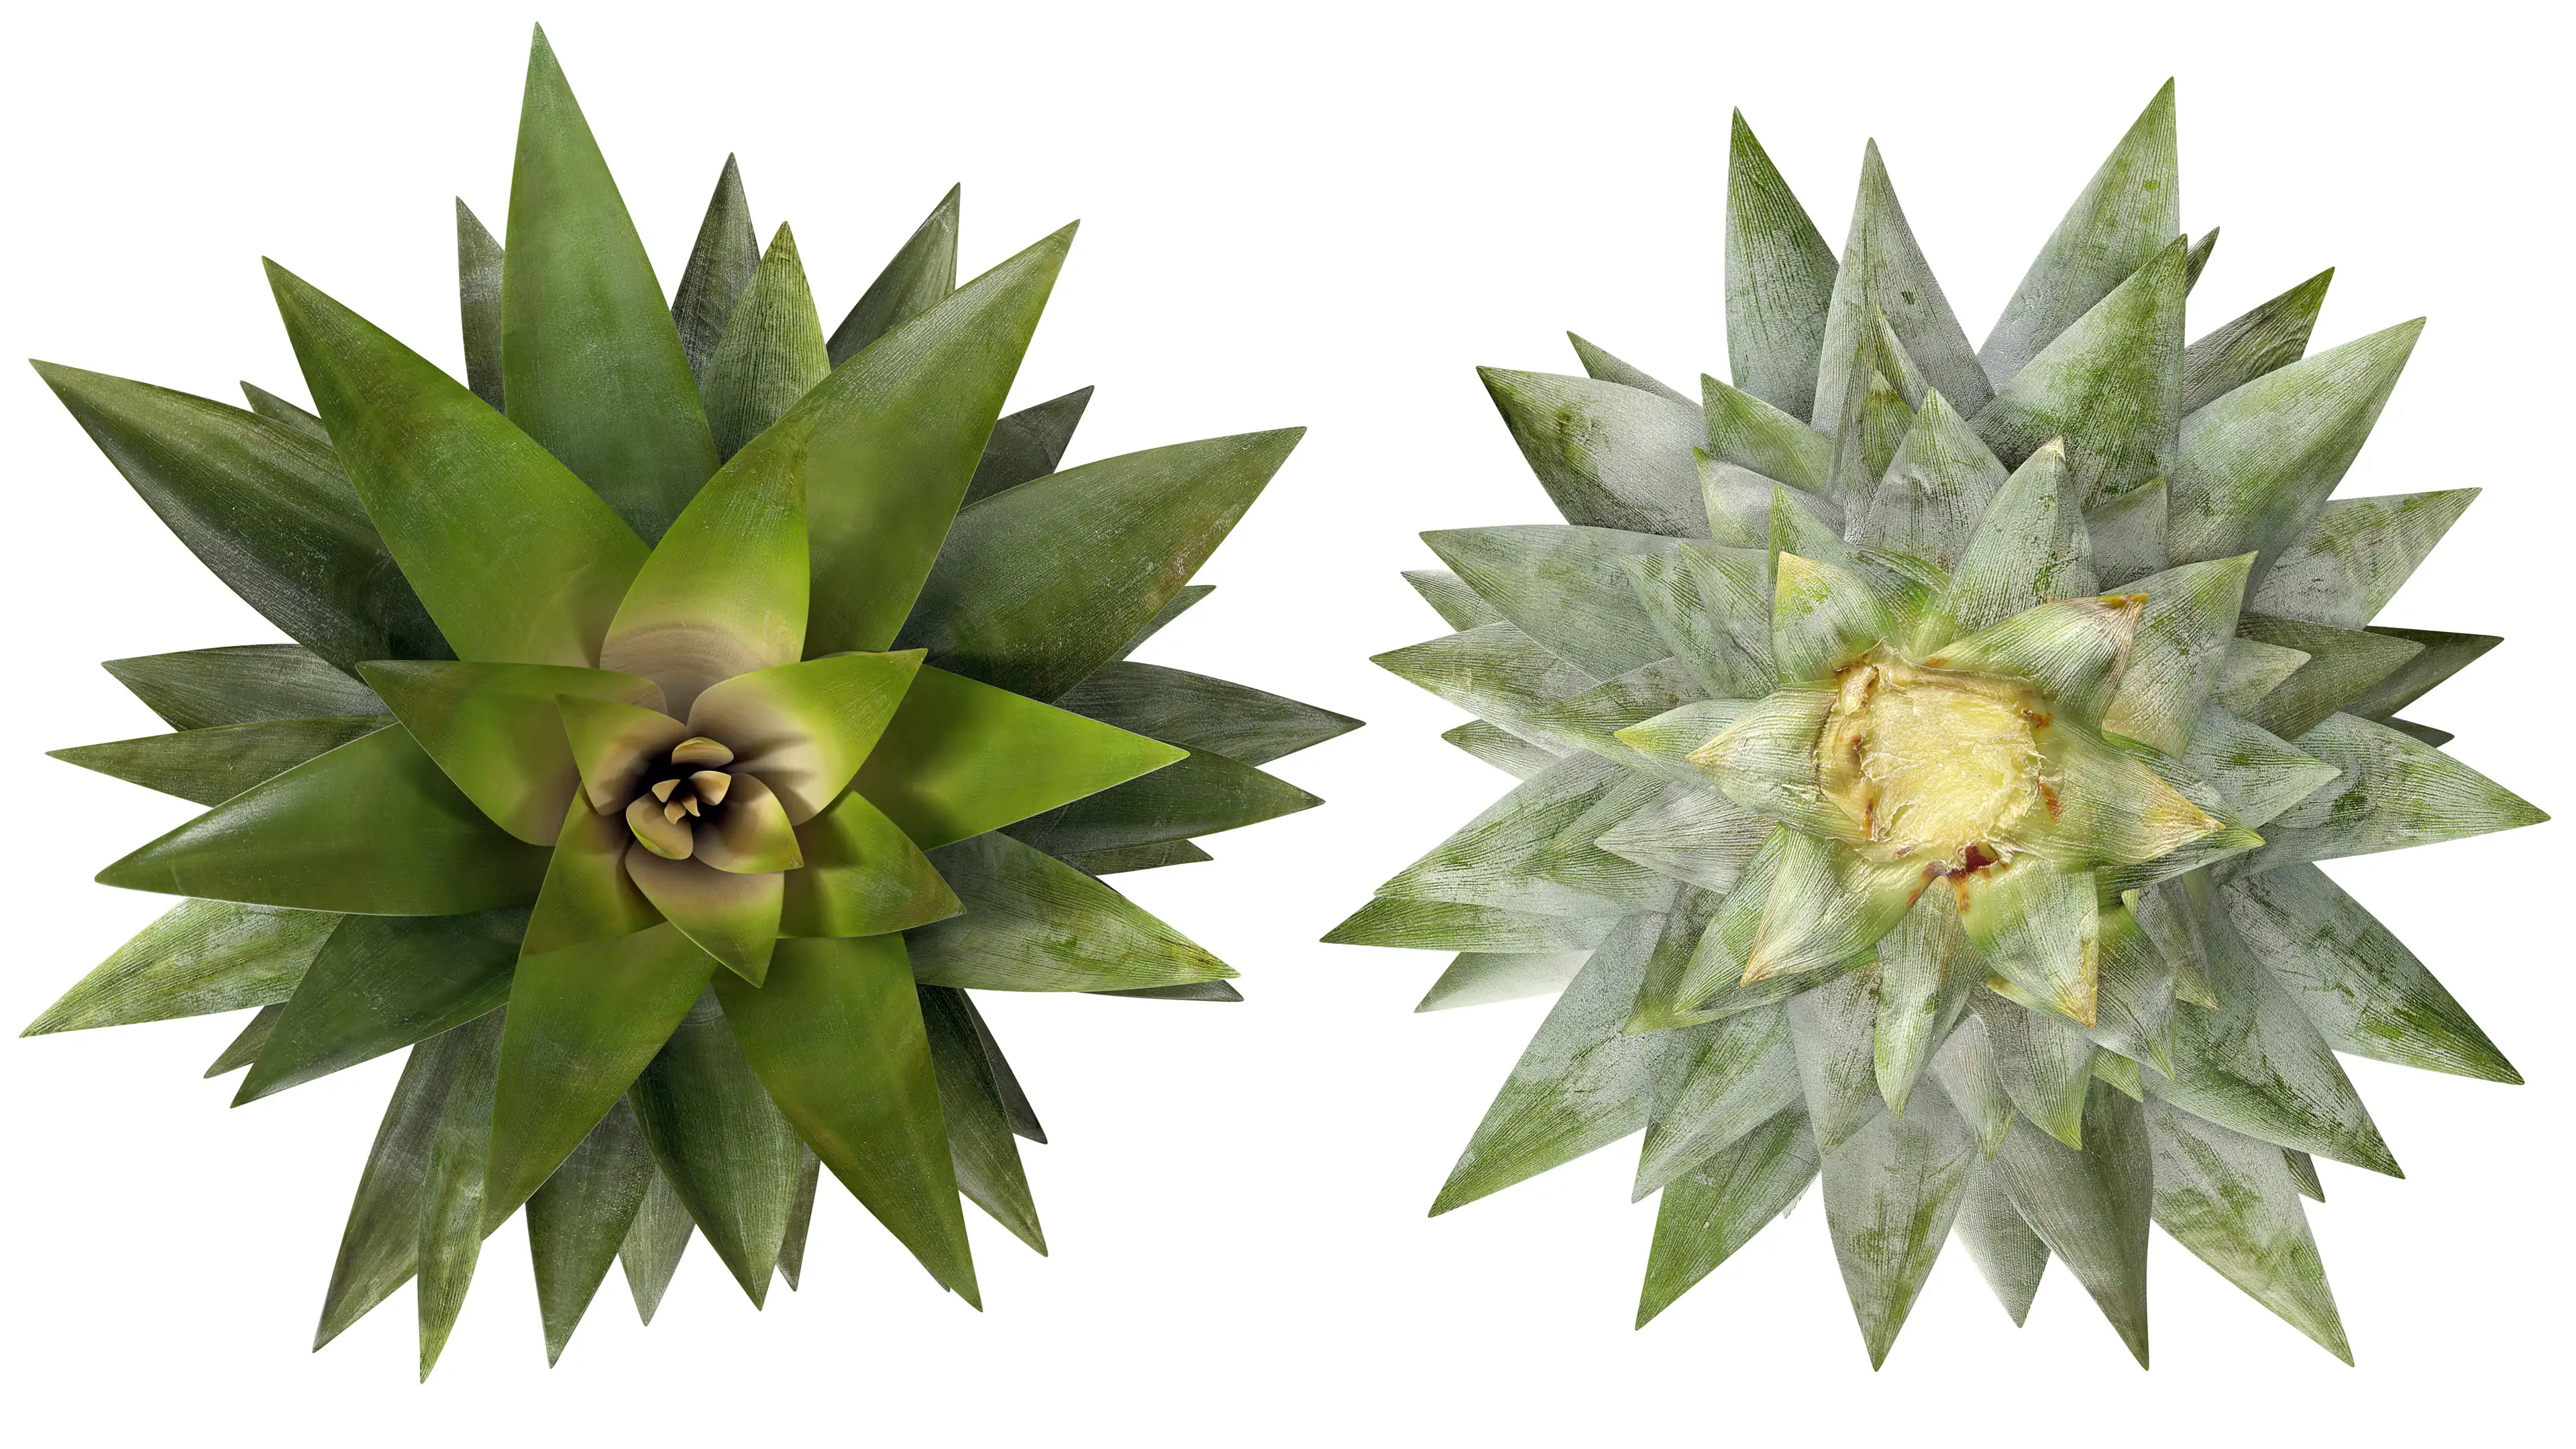 Pineapple crown leaves from above and below.